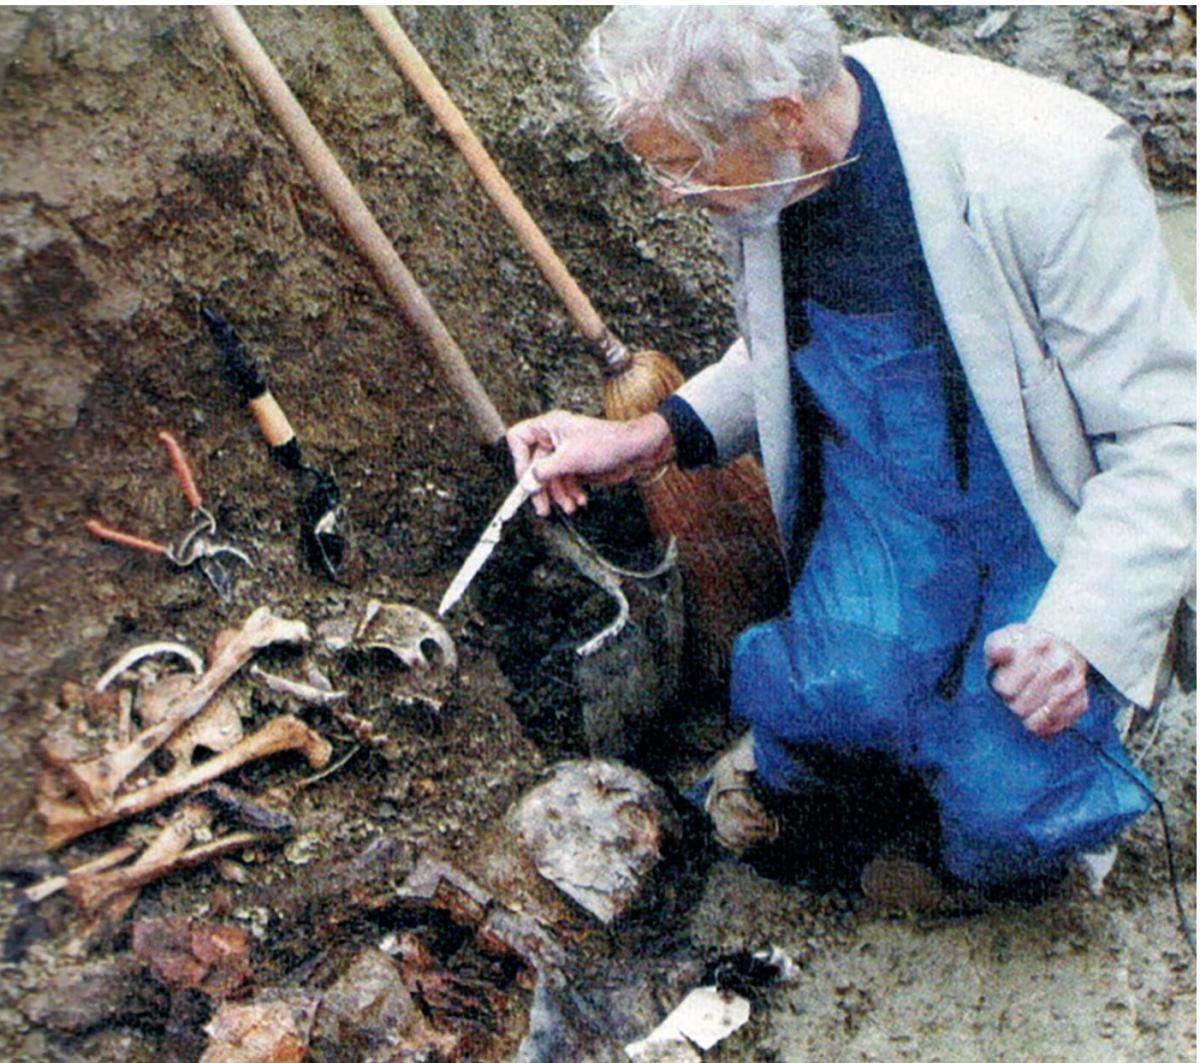 Dr. Johan Hultin and the remains of "Lucy"